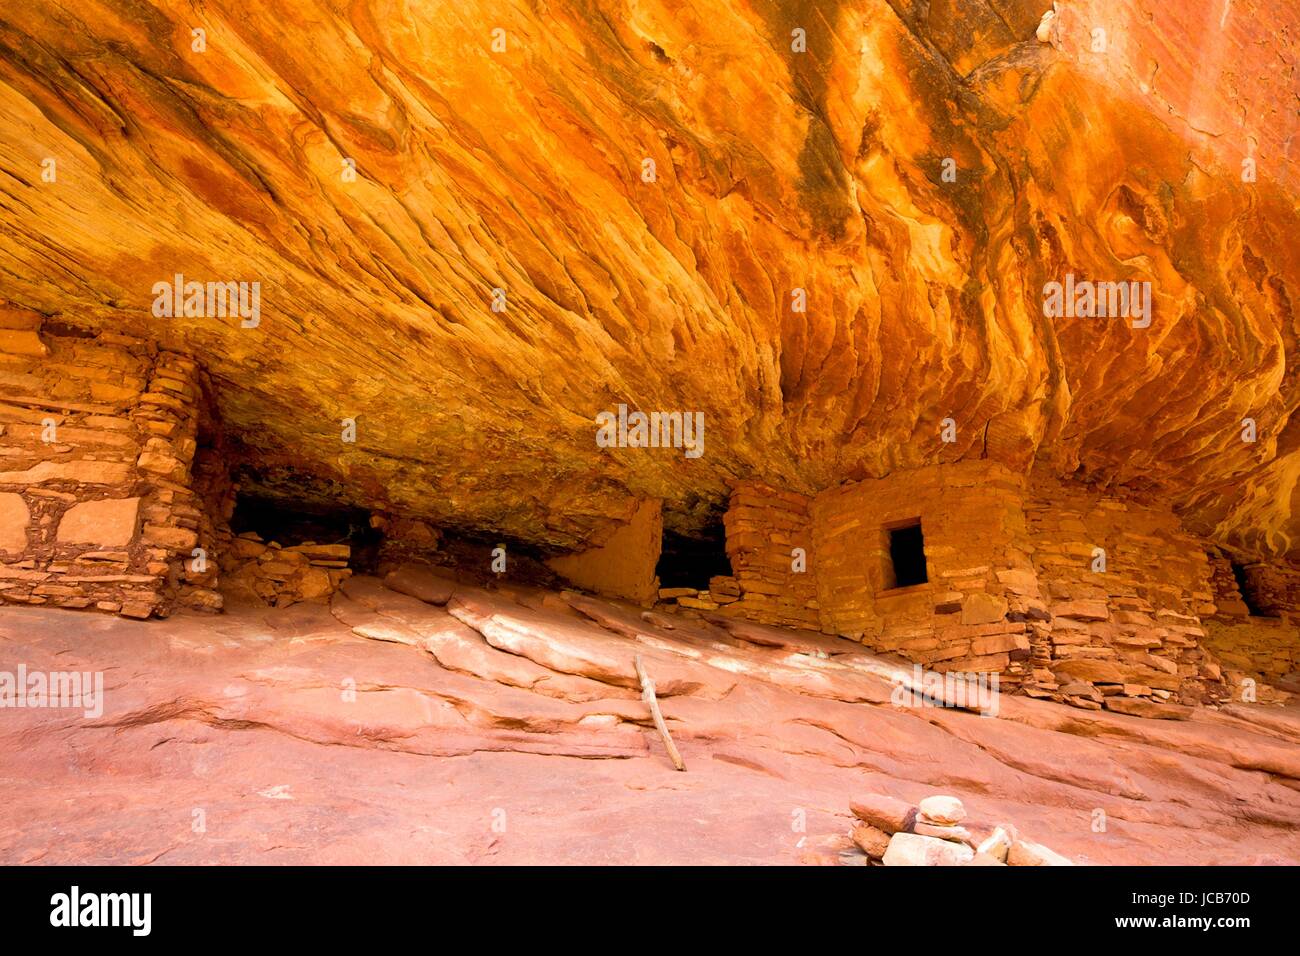 The Anasazi Indian House on Fire ruins in the South Fork of Mule Canyon at Cedar Mesa in Bears Ears National Monument near Blanding, Utah. Stock Photo